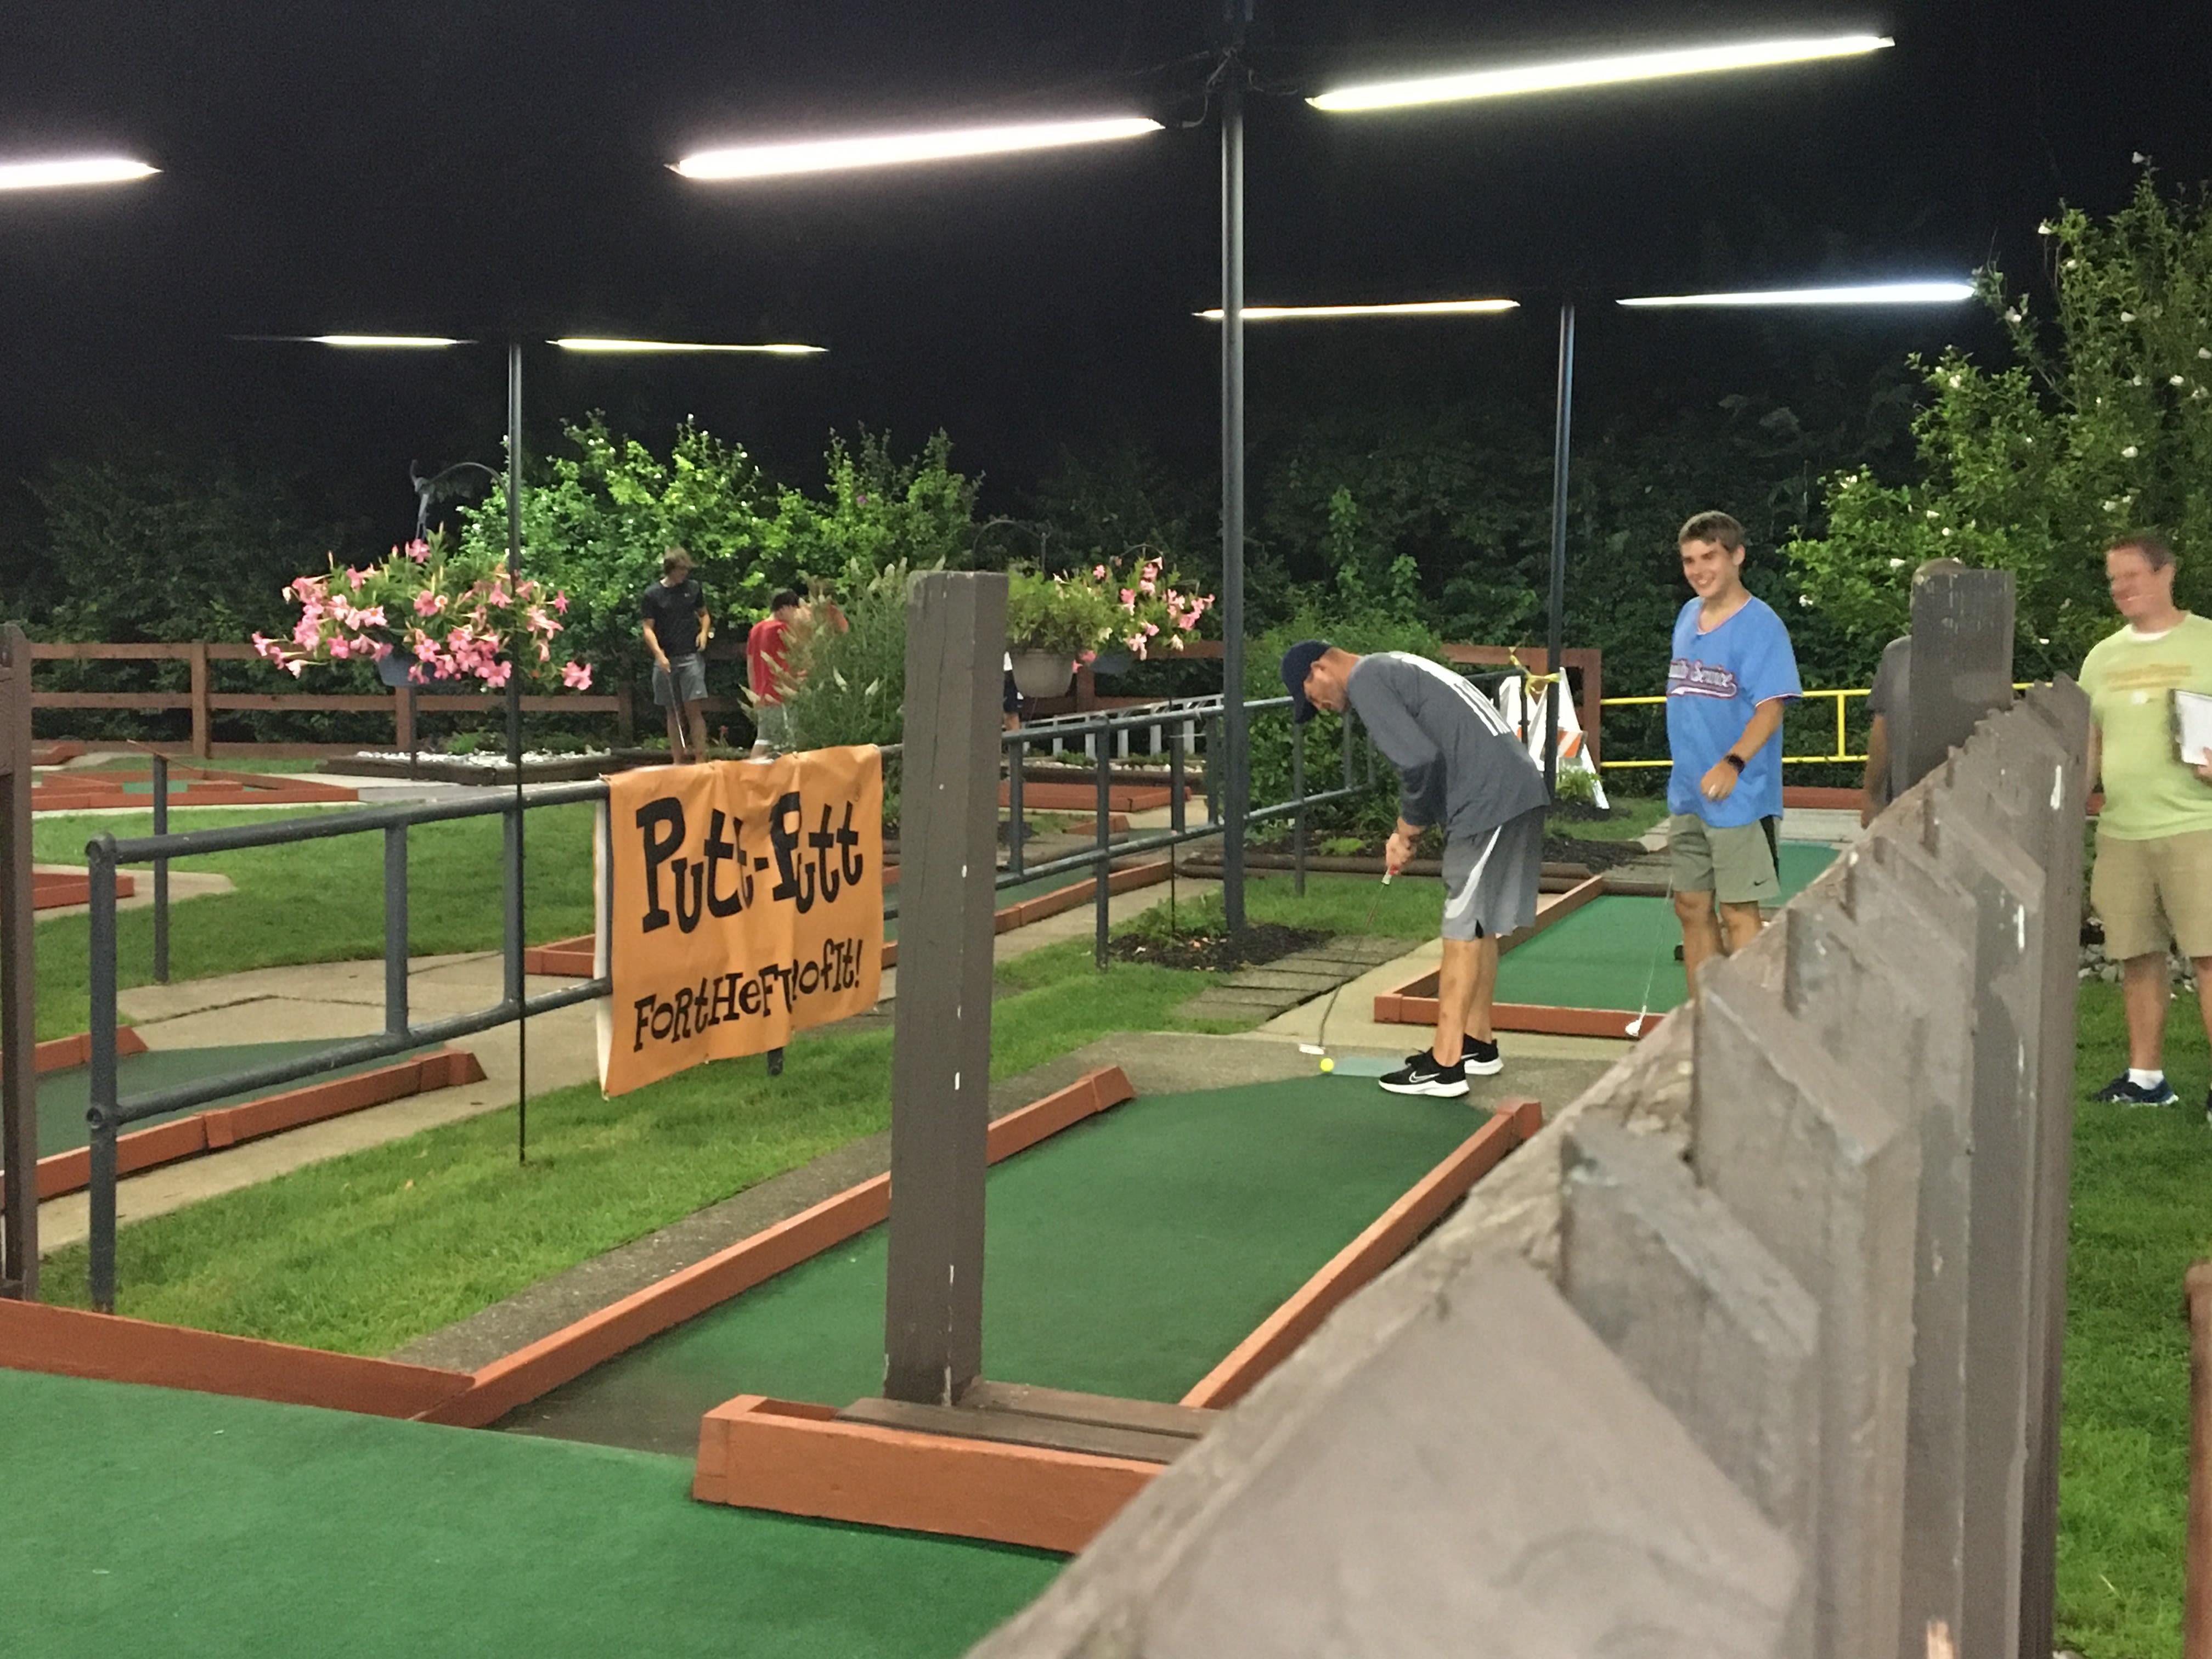 Katy went to play miniature golf on Monday, when it cost $1 to